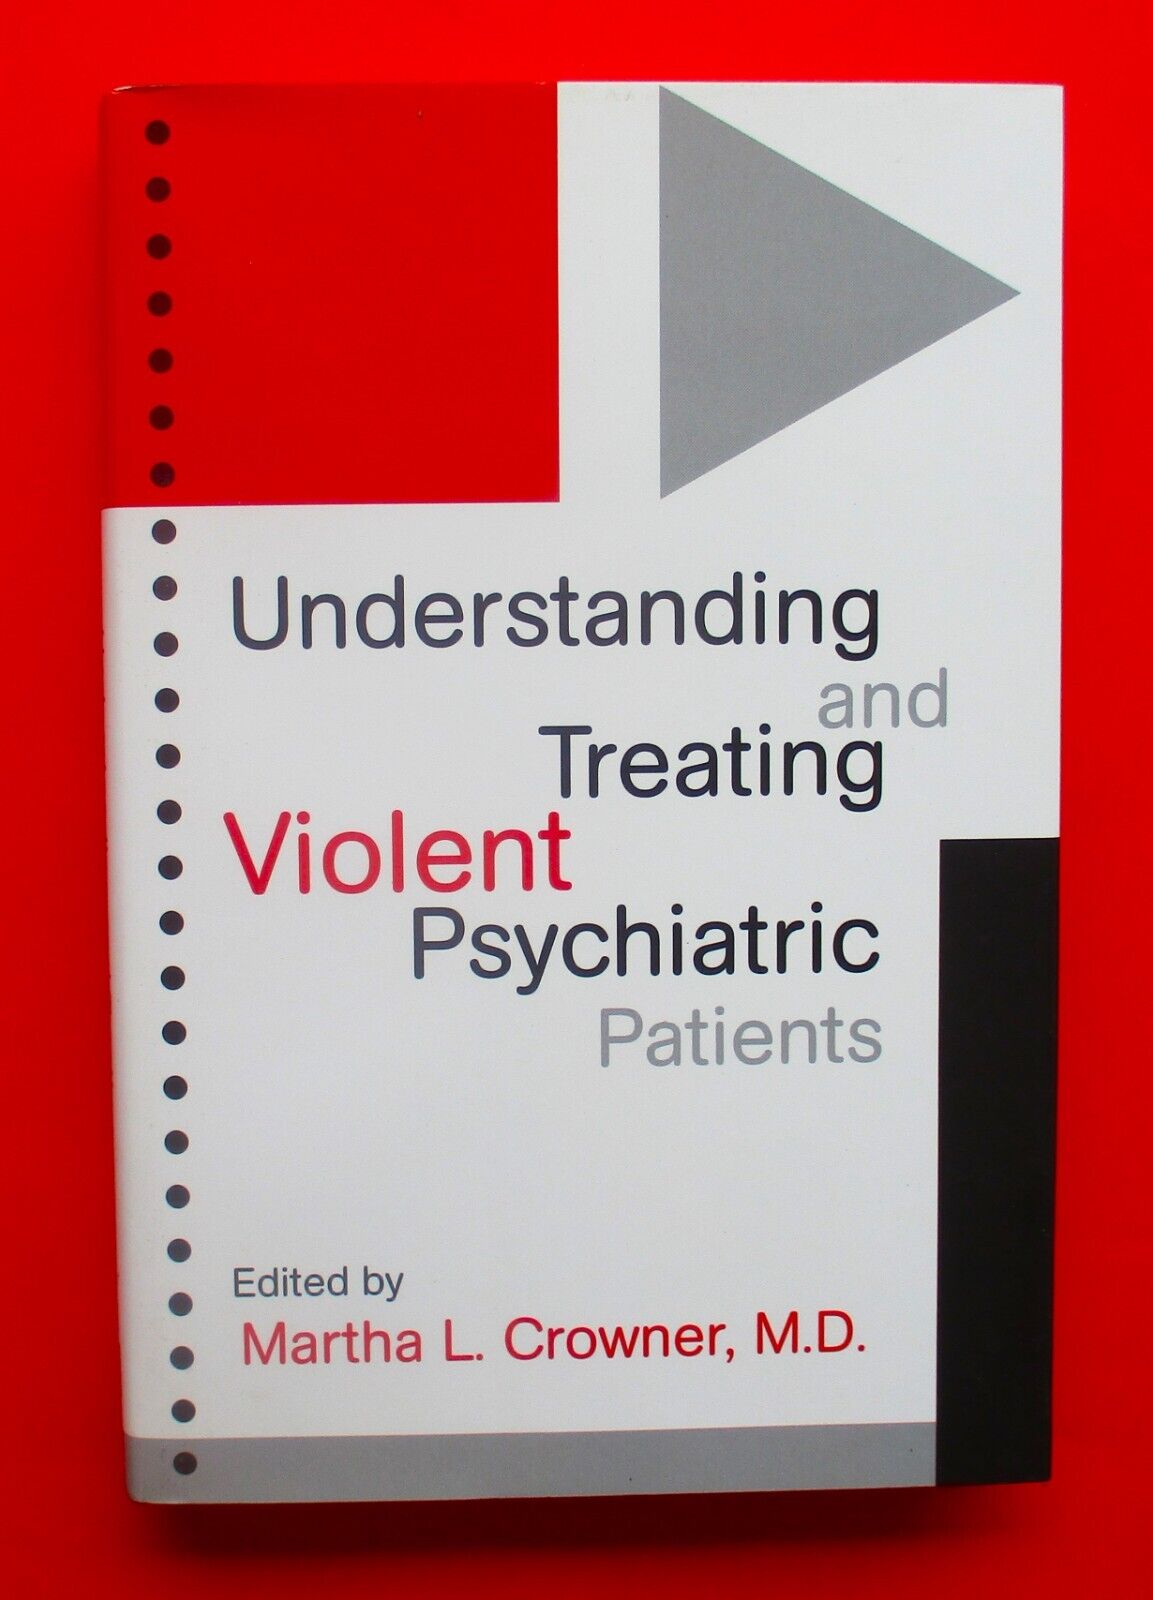 Understanding and Treating Violent Psychiatric Patients by Martha L. Crowner